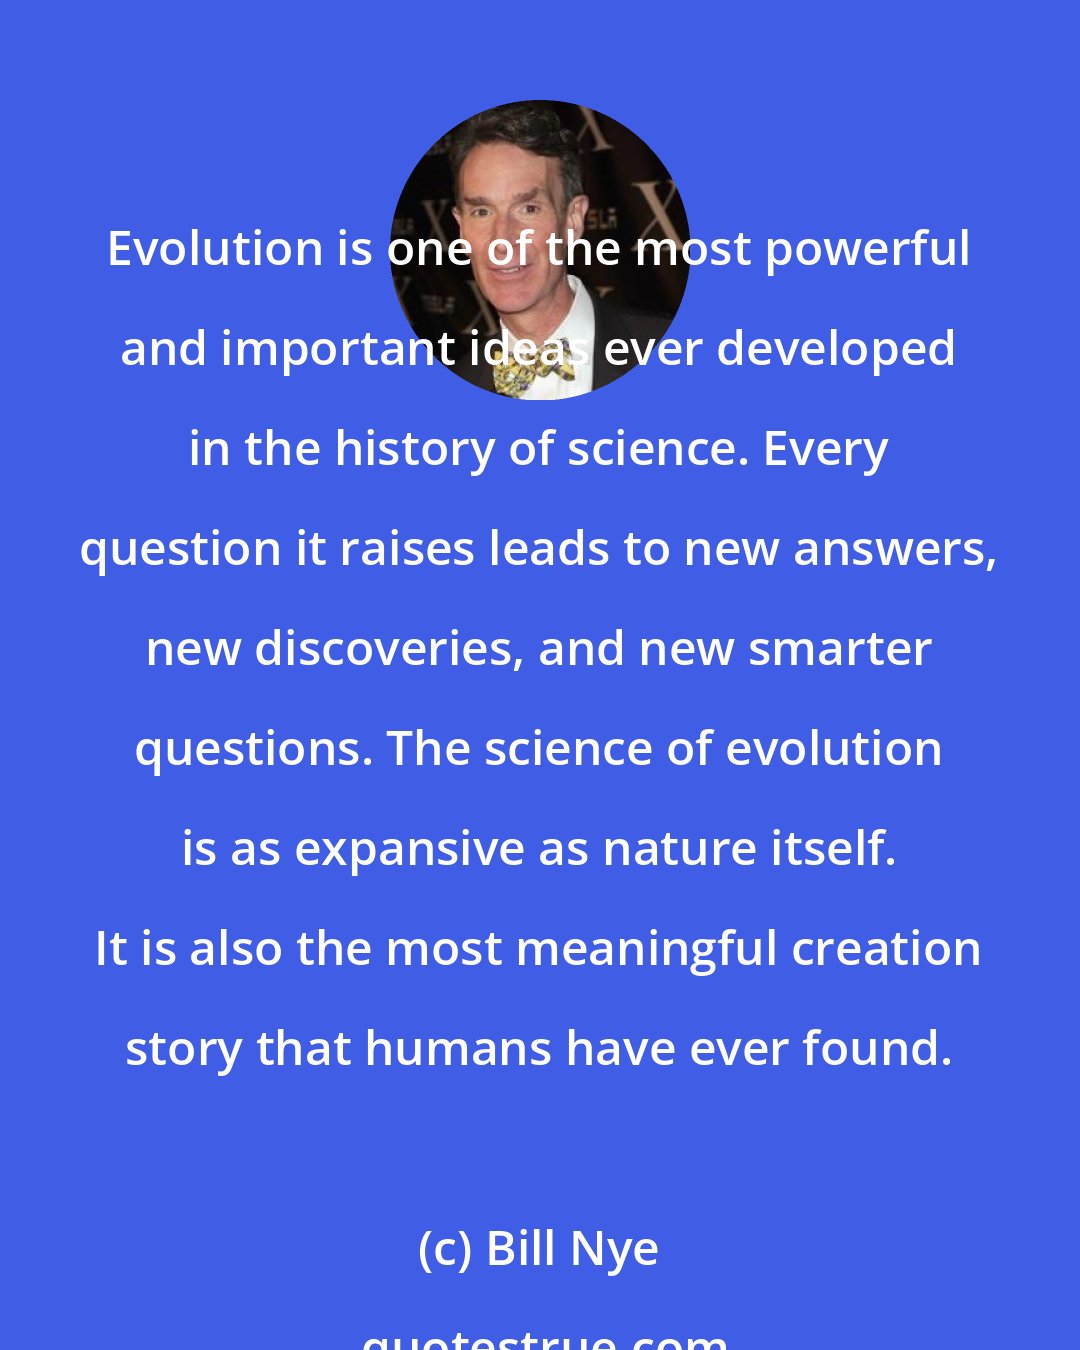 Bill Nye: Evolution is one of the most powerful and important ideas ever developed in the history of science. Every question it raises leads to new answers, new discoveries, and new smarter questions. The science of evolution is as expansive as nature itself. It is also the most meaningful creation story that humans have ever found.